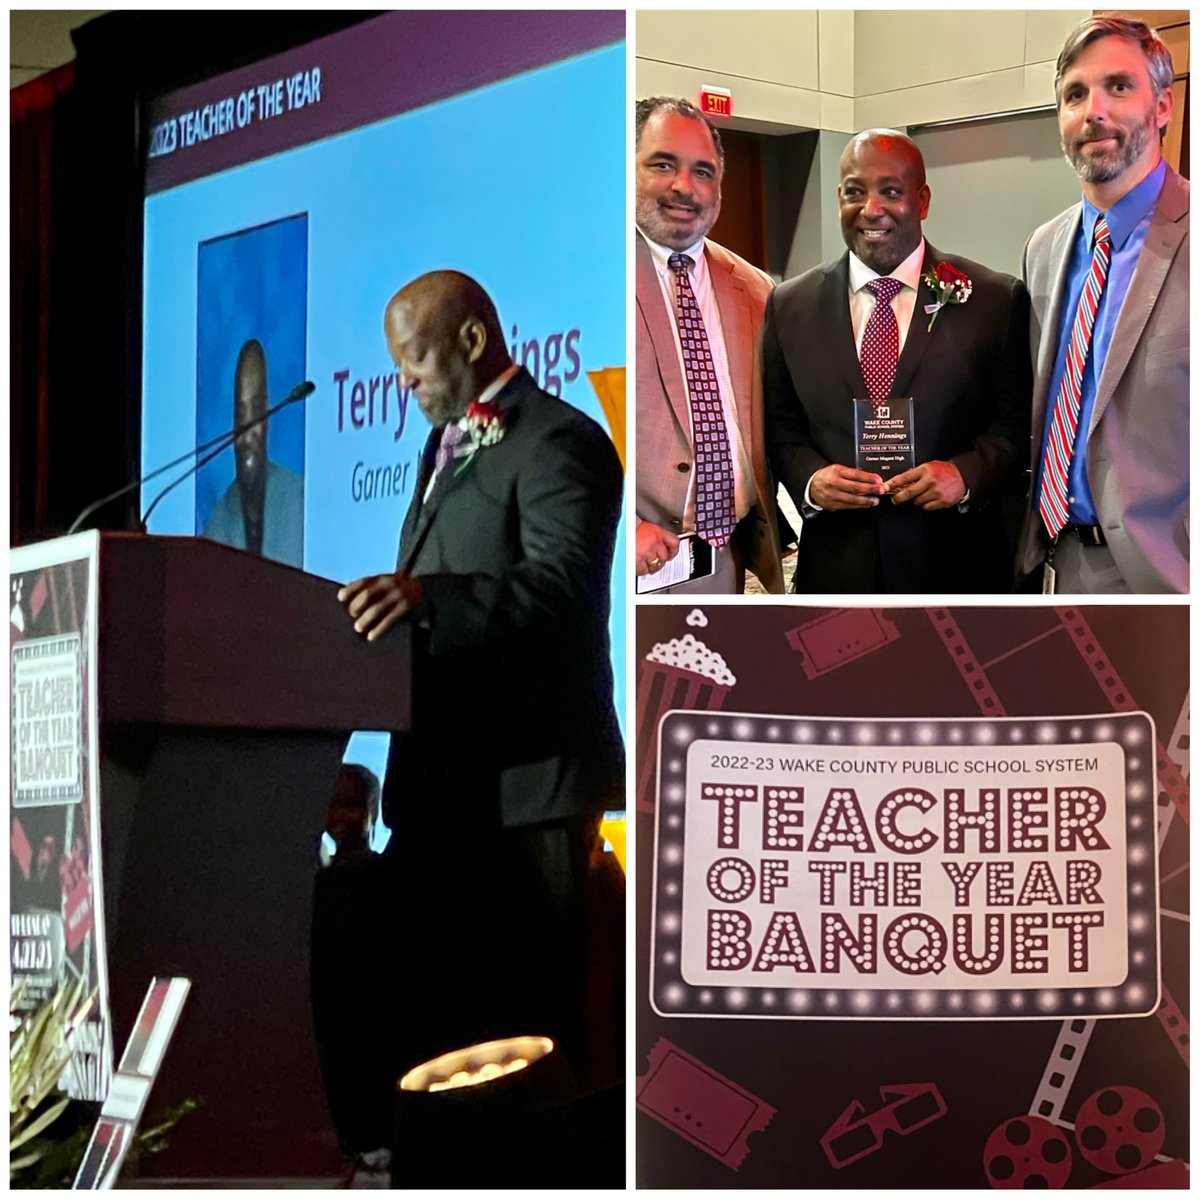 Congratulations to Mr. Hennings @Garner_HS on being named WCPSS Teacher of the Year! #FromHereAnythingisPossible #SEArising